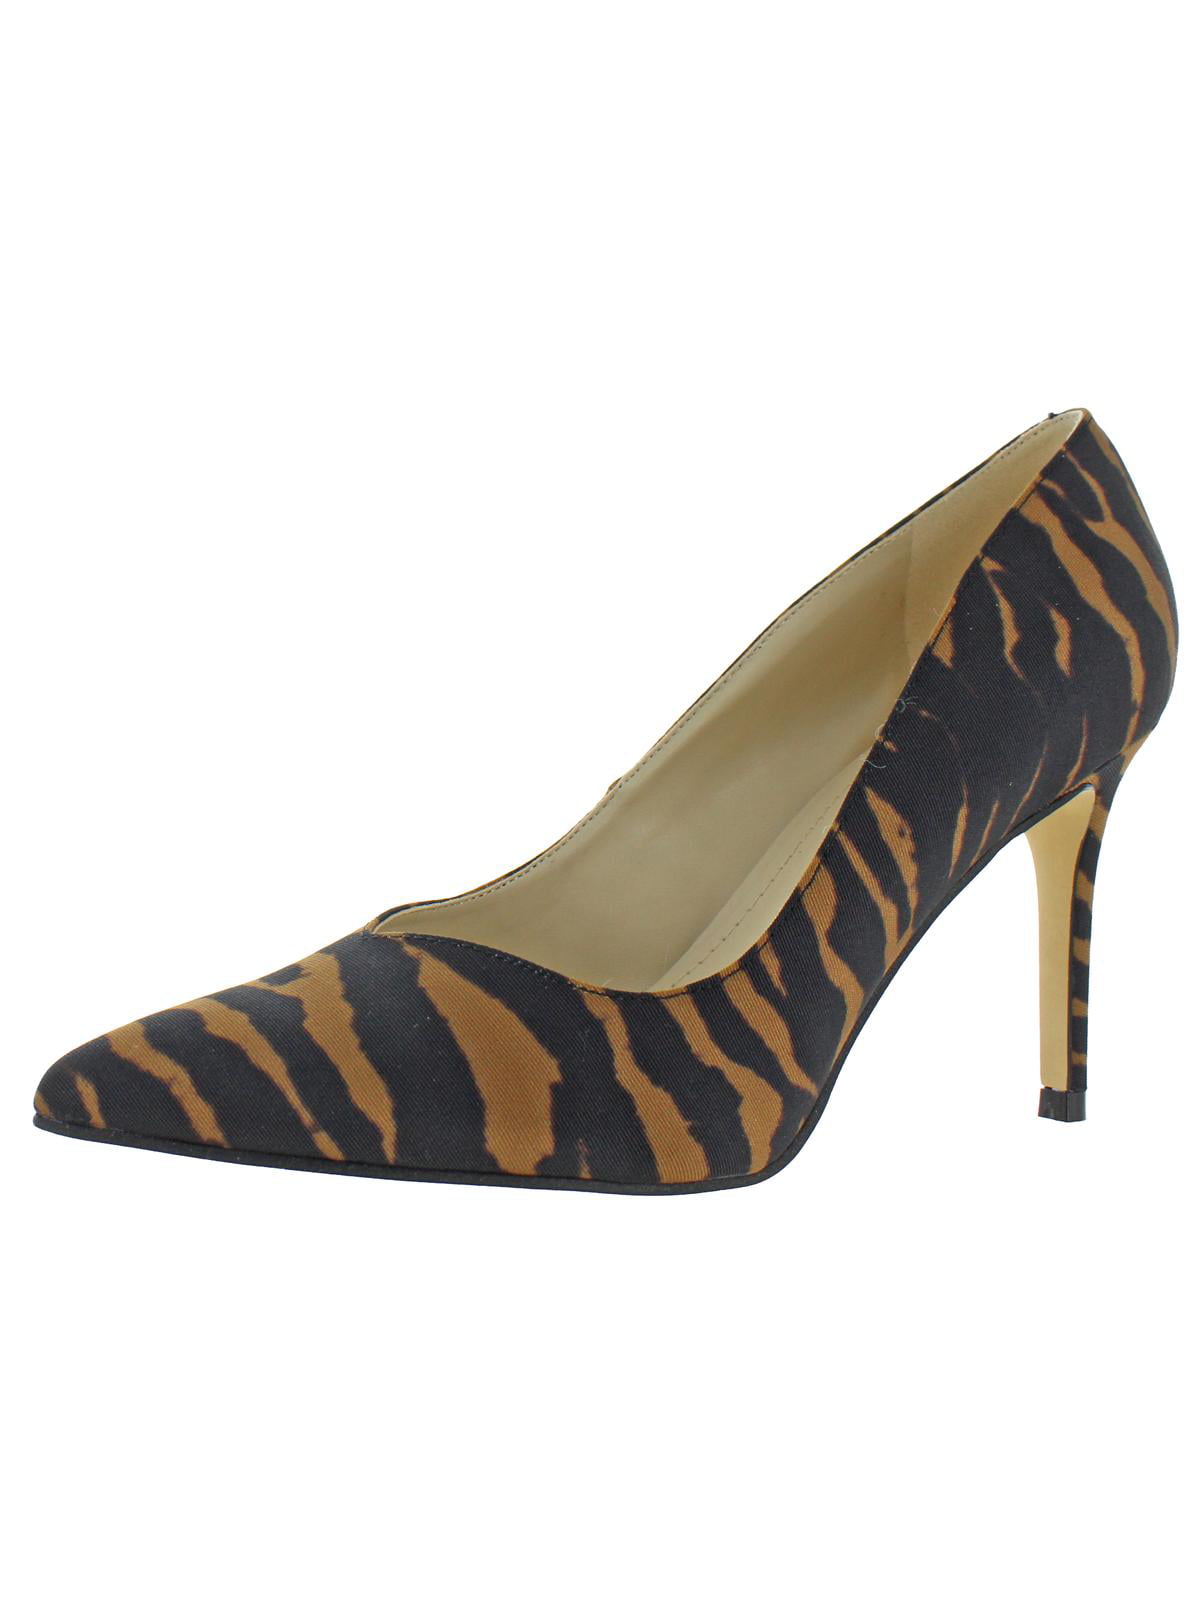 marc fisher animal print shoes